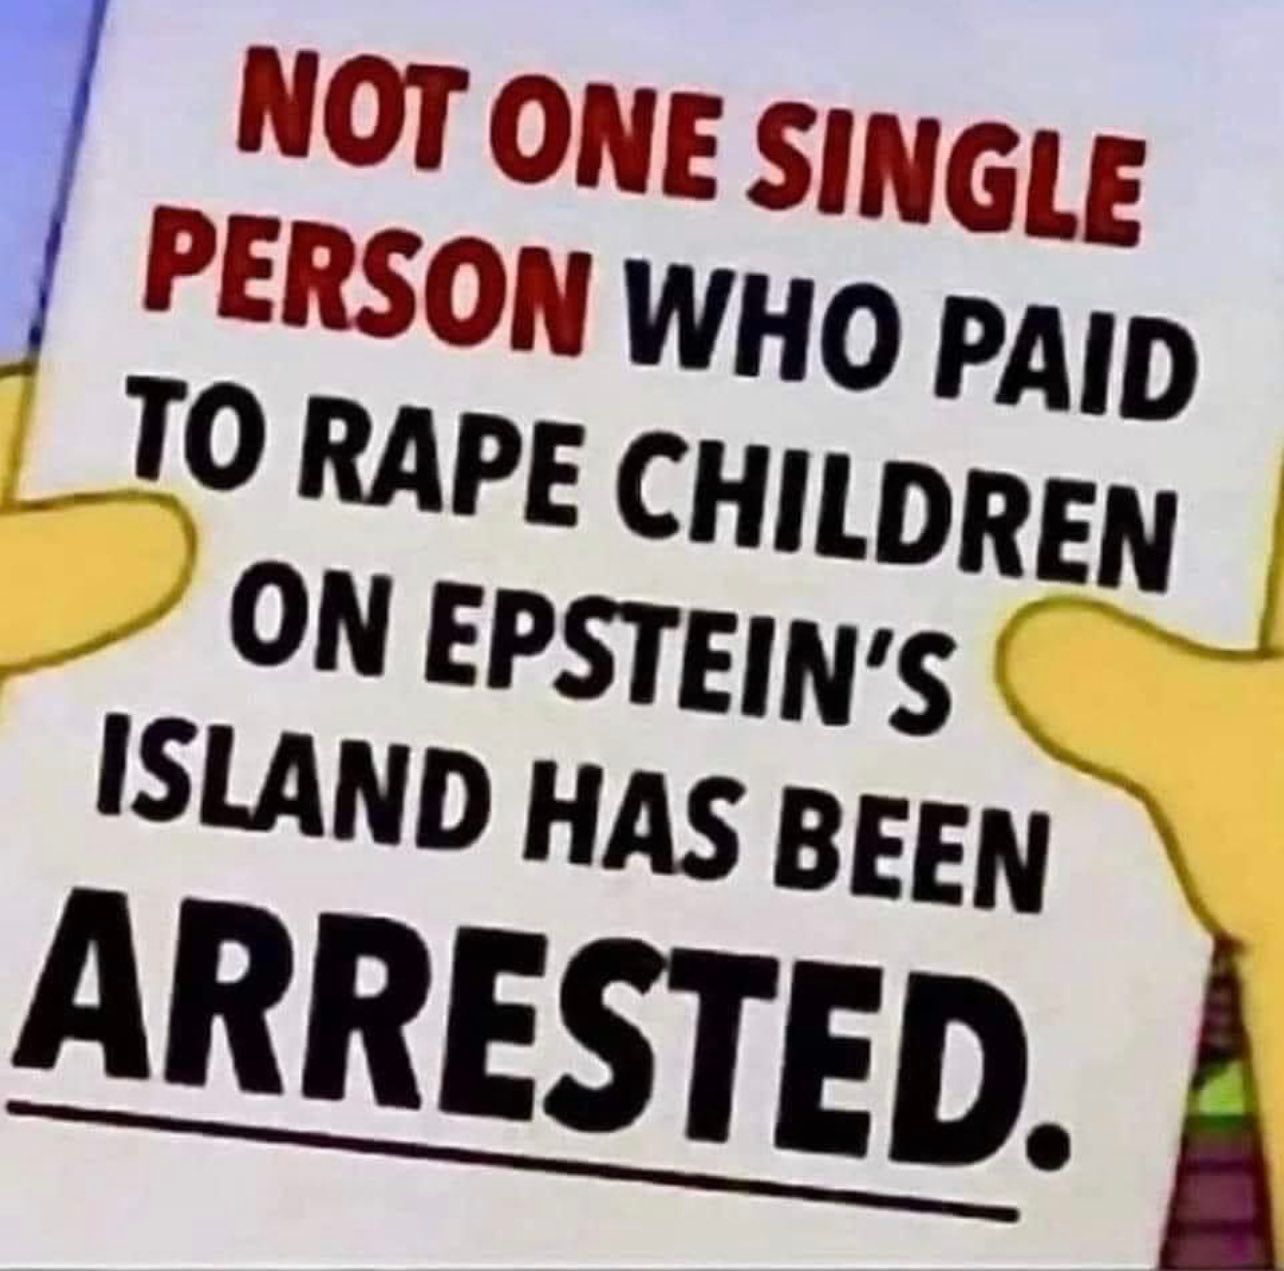 no-one-who-paid-to-rape-children-on-epstein-island-has-been-arrested.jpg